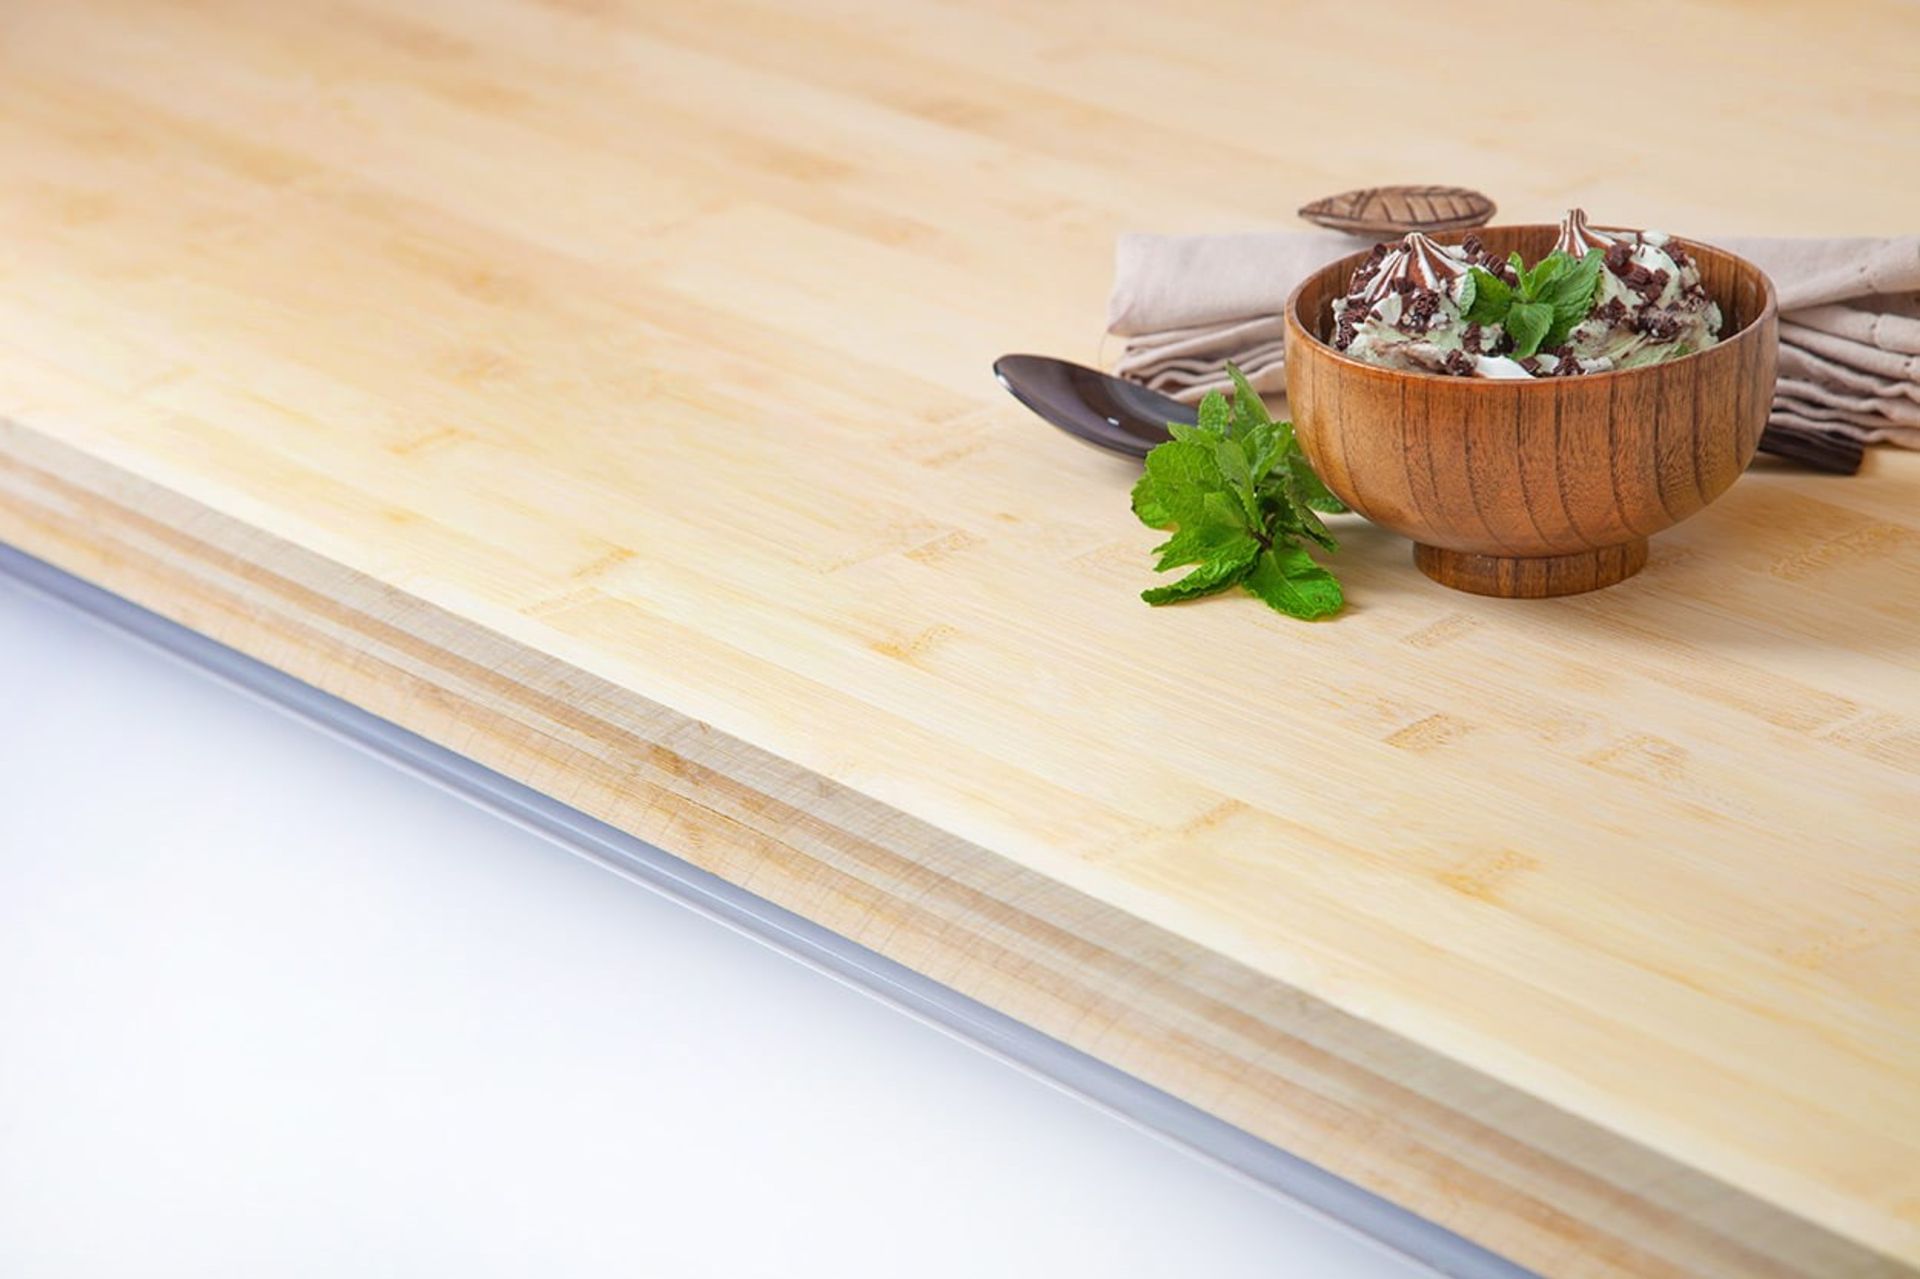 1 x Layered Solid Bamboo Wood Worktop - Size: 4000 x 650 x 40mm - Ideal For Kitchens, Countertops, - Image 5 of 5